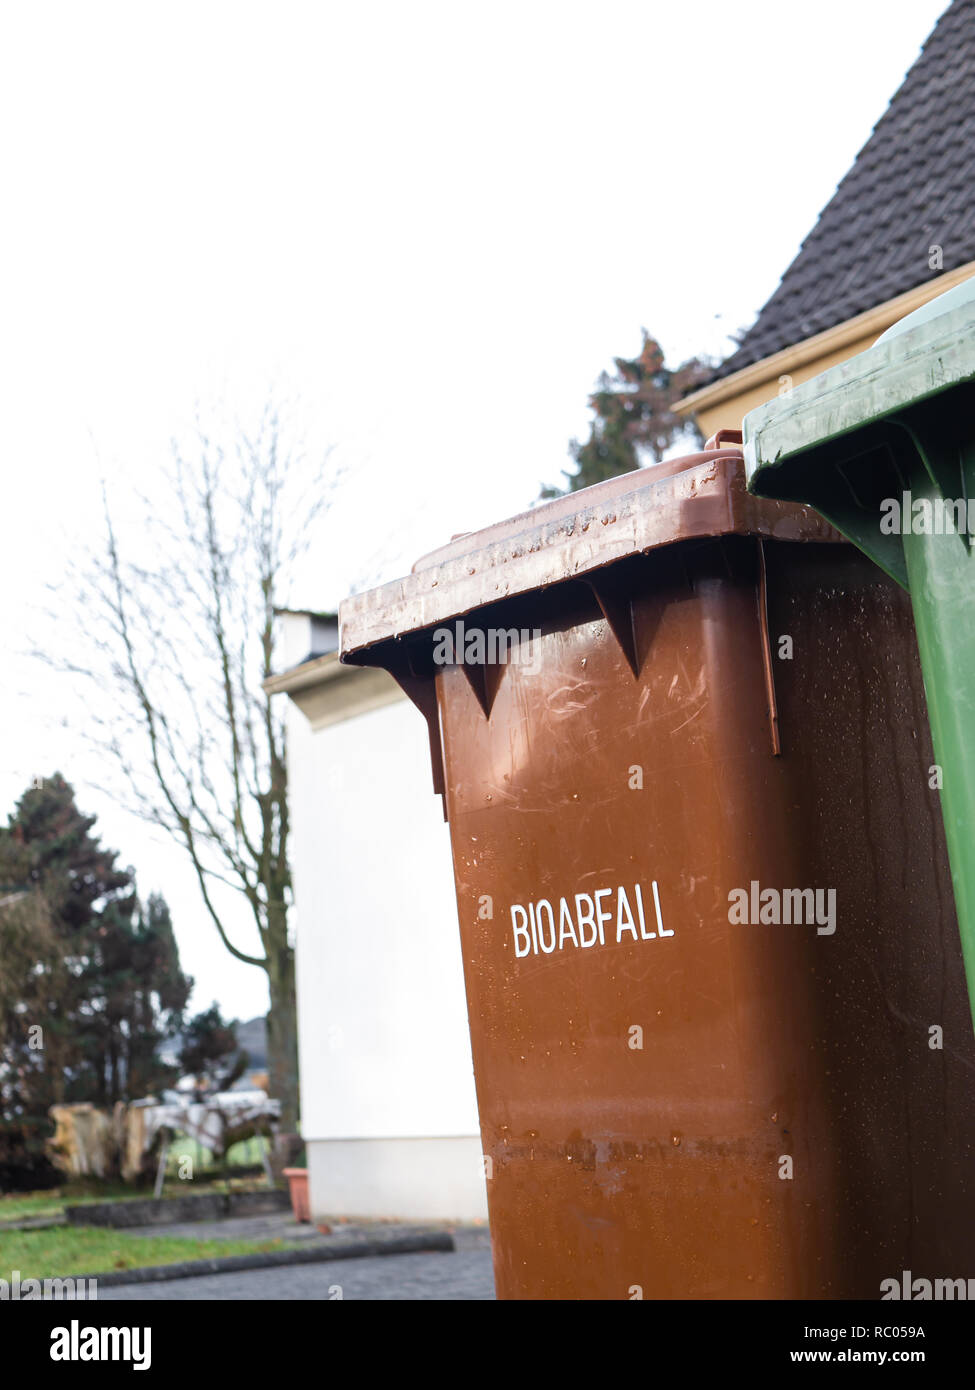 Brown German Garbage Can for biodegradable Waste, Text saying 'Biodegradable Waste' Stock Photo